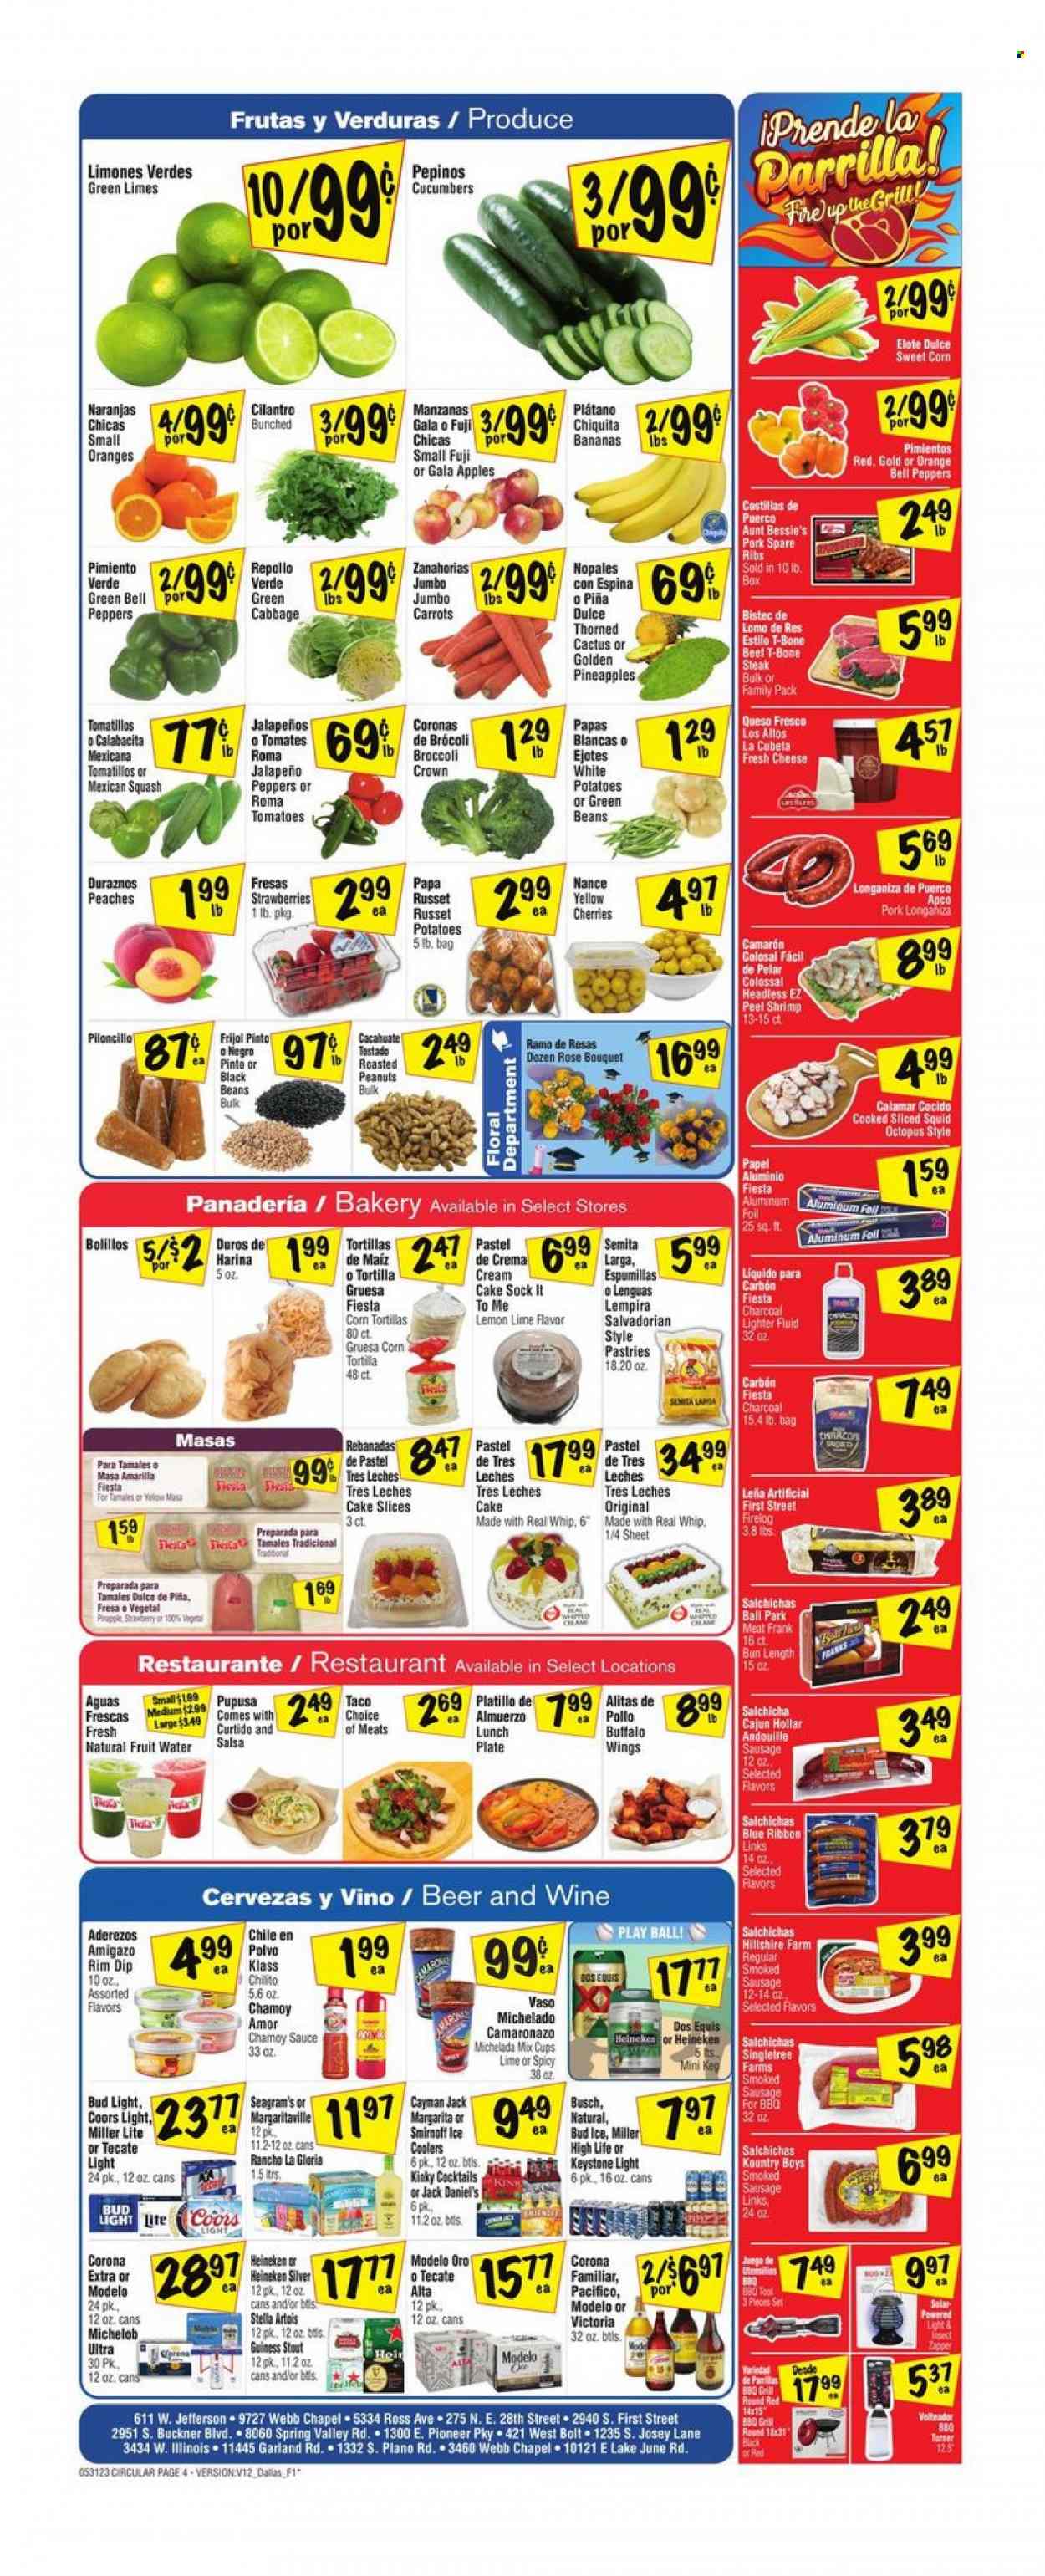 thumbnail - Fiesta Mart Flyer - 05/31/2023 - 06/06/2023 - Sales products - tortillas, cake, Blue Ribbon, Ace, Aunt Bessie's, beans, bell peppers, broccoli, cabbage, carrots, corn, cucumber, green beans, russet potatoes, tomatillo, tomatoes, potatoes, jalapeño, sweet corn, mexican squash, apples, bananas, Gala, limes, pineapple, cherries, peaches, squid, octopus, shrimps, Jack Daniel's, sauce, Hillshire Farm, sausage, smoked sausage, queso fresco, cheese, dip, black beans, cilantro, salsa, roasted peanuts, peanuts, water, alcohol, Smirnoff, beer, Busch, Stella Artois, Bud Light, Corona Extra, Heineken, Keystone, Modelo, beef meat, t-bone steak, steak, ribs, pork meat, pork ribs, pork spare ribs, Miller Lite, Coors, Dos Equis, Michelob. Page 4.